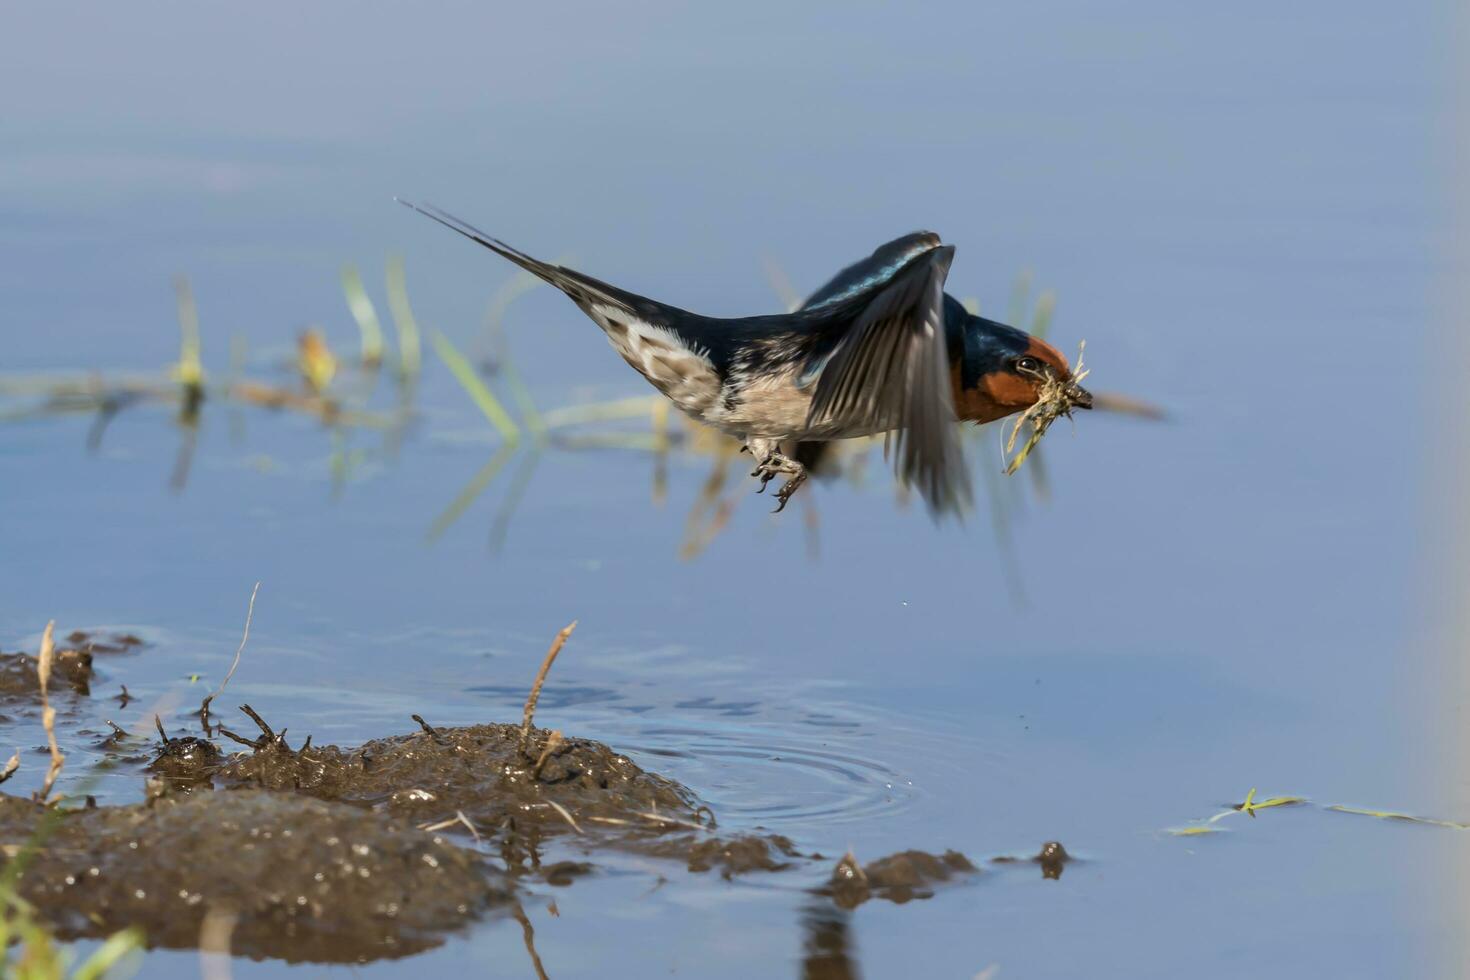 Welcome Swallow in Australasia photo